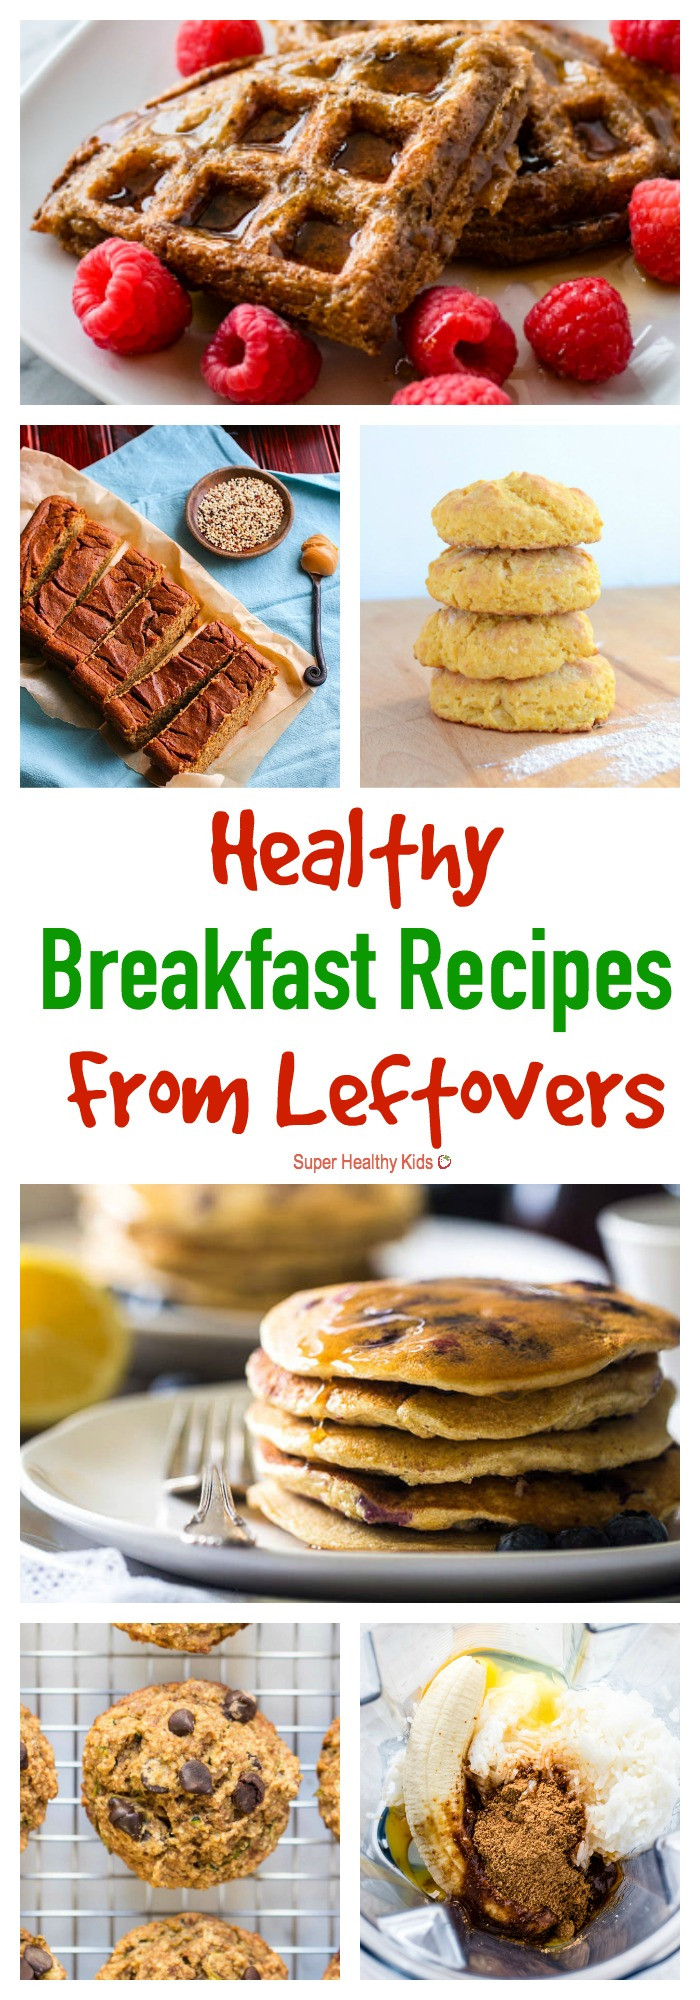 Healthy Recipes Kids Can Make
 Healthy Breakfast Recipes You Can Make From Leftovers